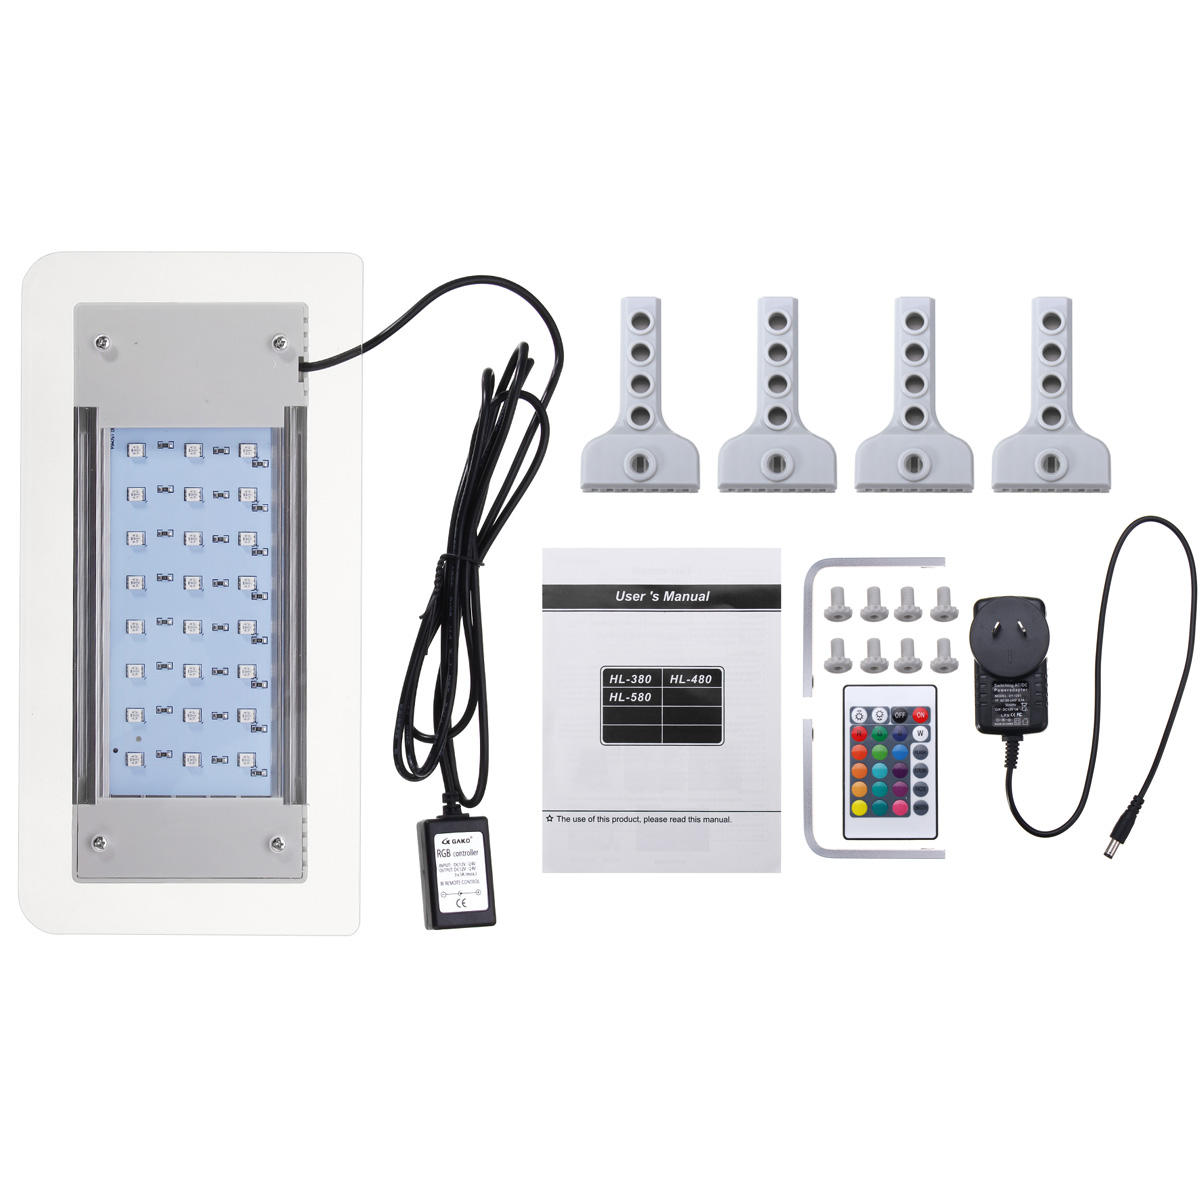 Image of HL-380B With Controller 5050 RGB 260*130*155mm 5050 24 smd 5W Apply to 26-42cm tank Fish lamp Clip lamp Aquarium light